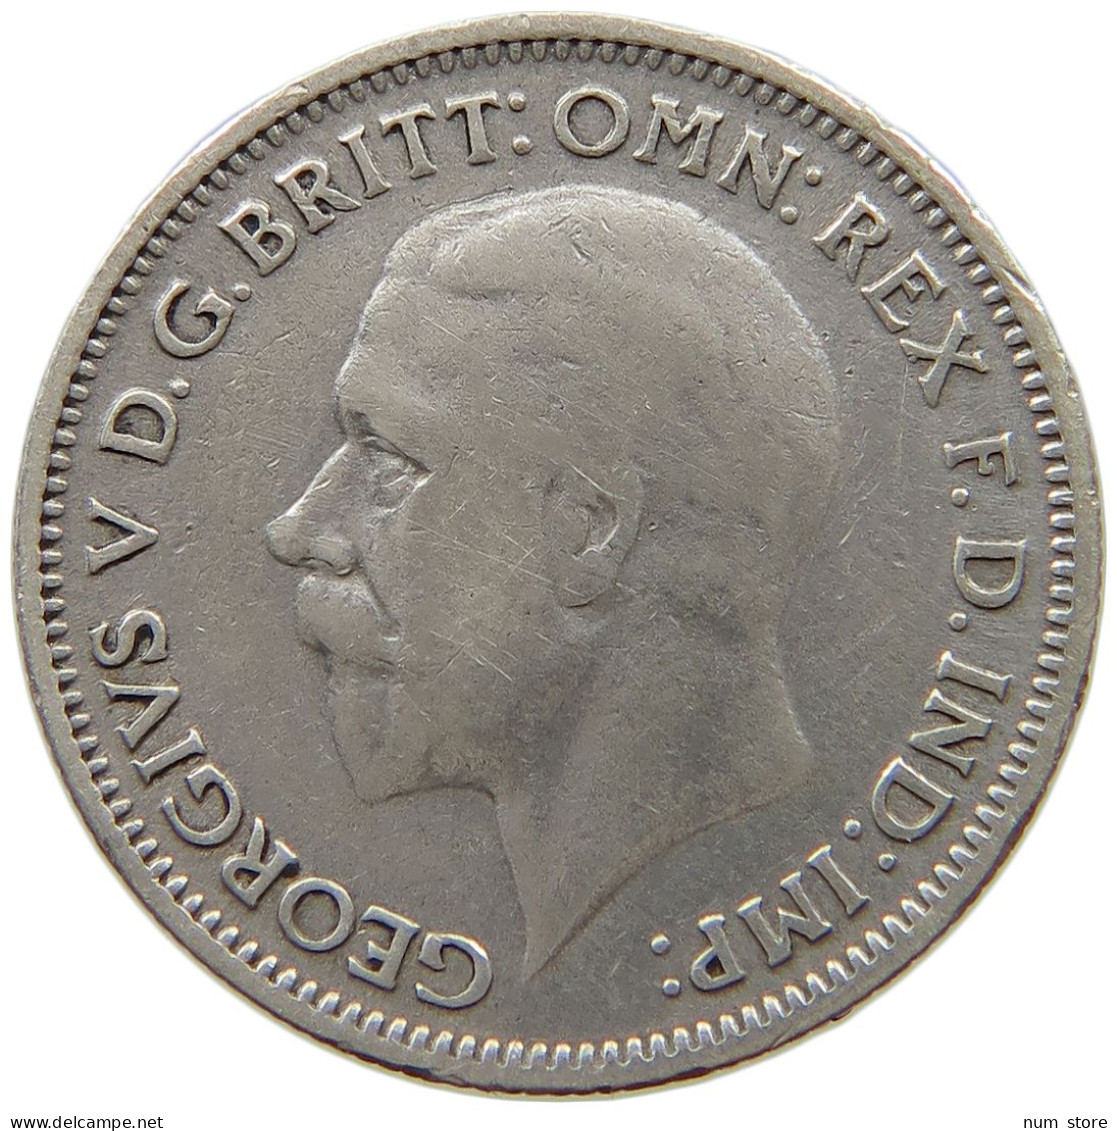 GREAT BRITAIN SIXPENCE 1936 #a069 0245 - H. 6 Pence